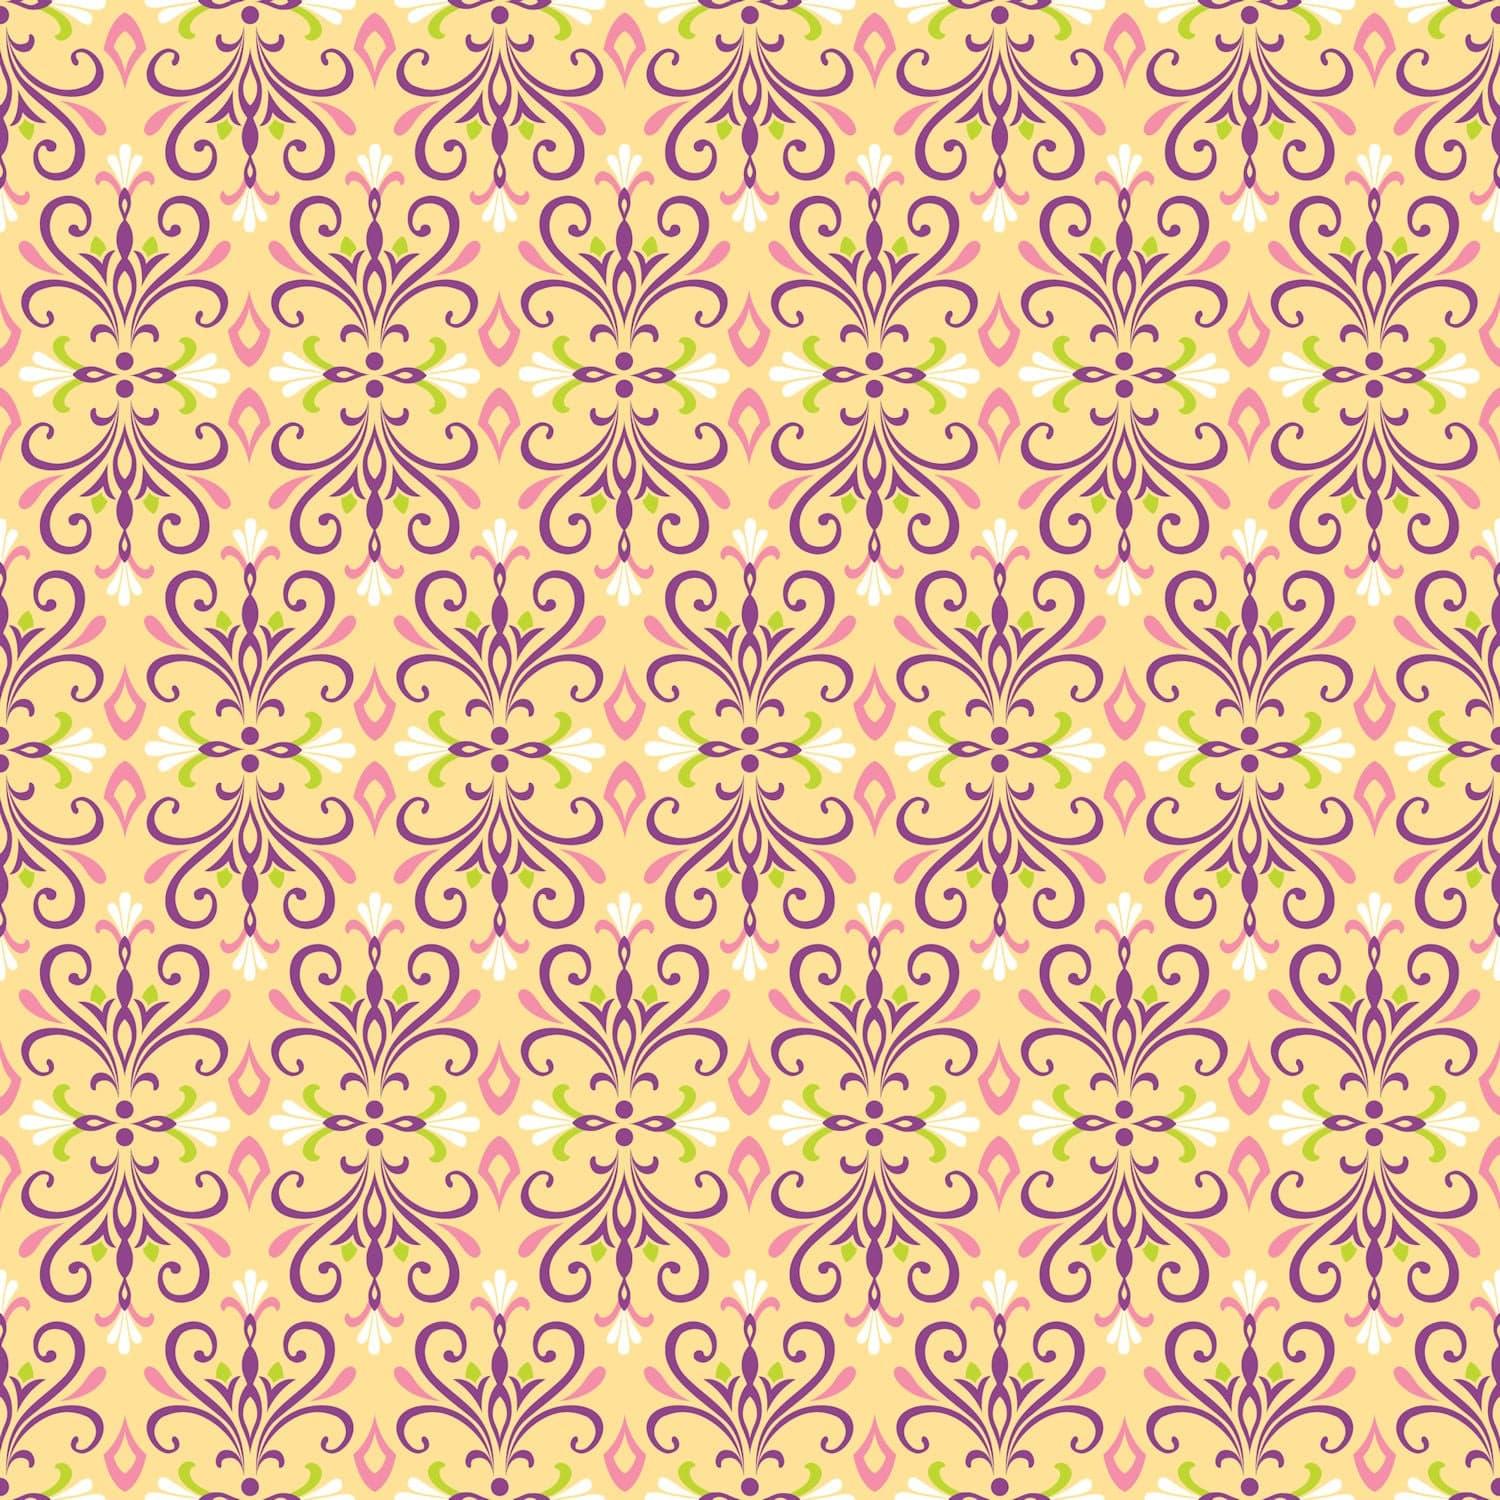 Rapunzel Collection Castle 12 x 12 Double-Sided Scrapbook Paper by SSC Designs - Scrapbook Supply Companies